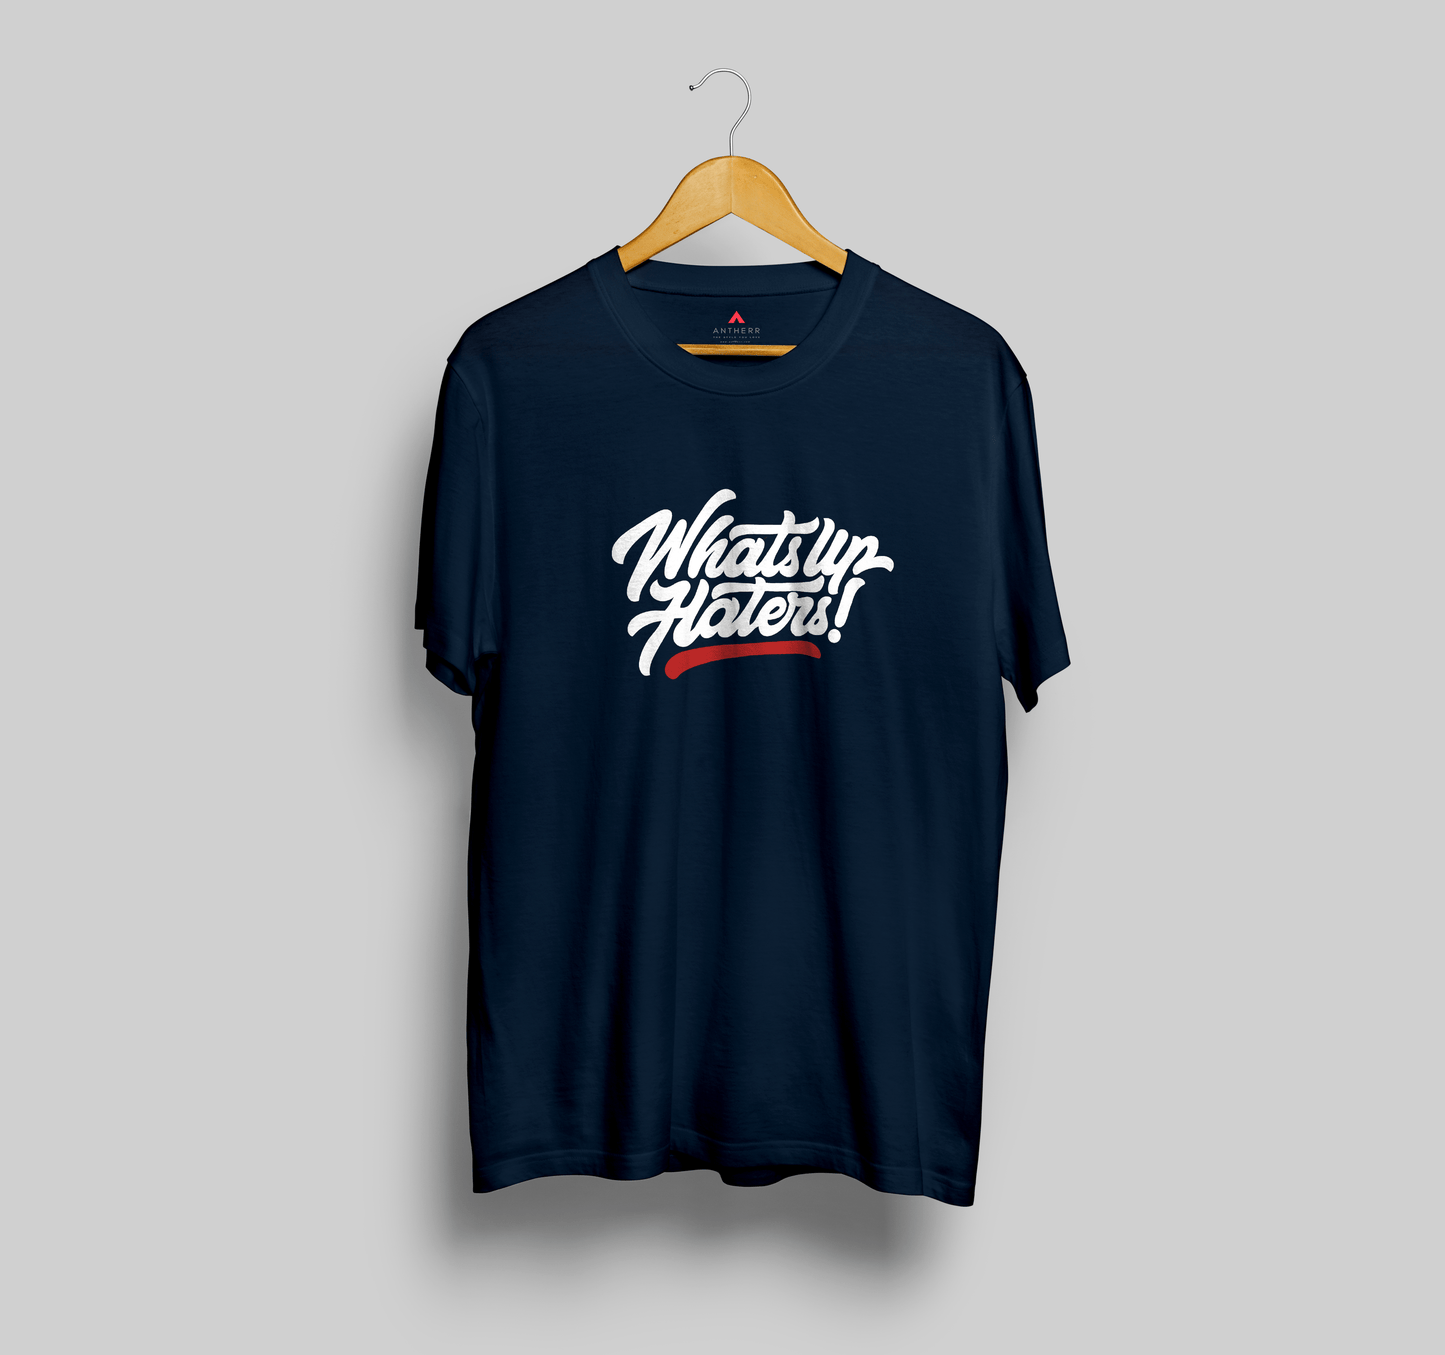 " WHAT'S UP HATERS " - UNISEX HALF-SLEEVE T-SHIRTS NAVY BLUE